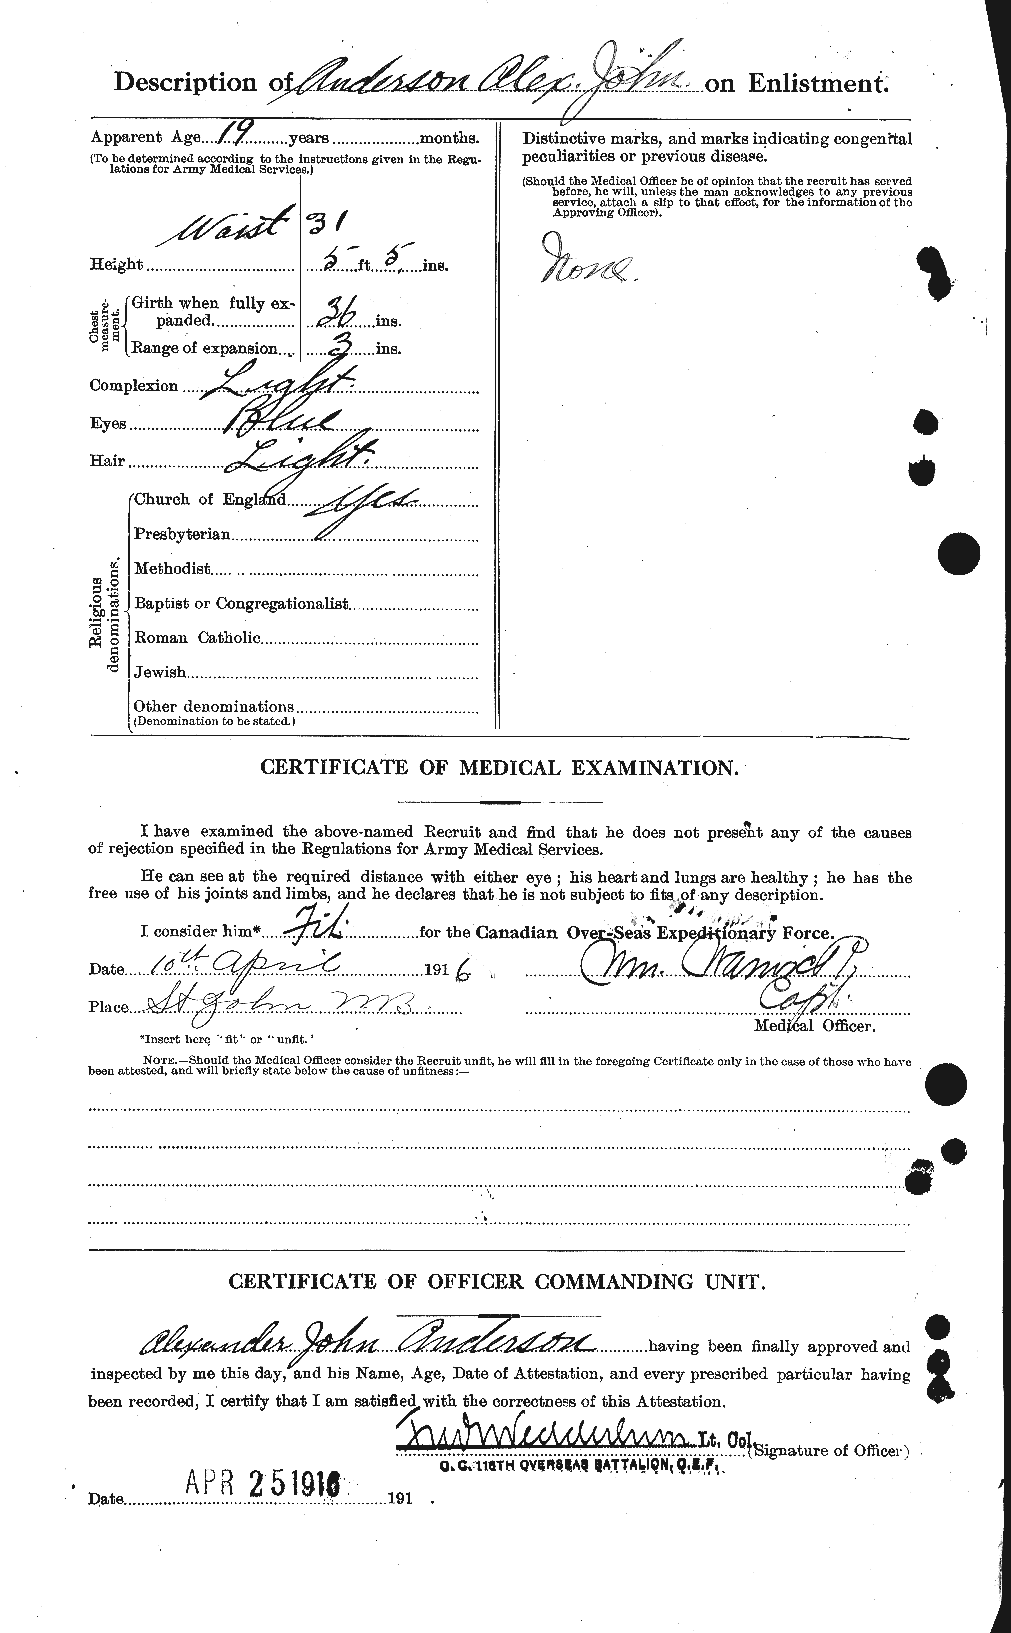 Personnel Records of the First World War - CEF 209485b